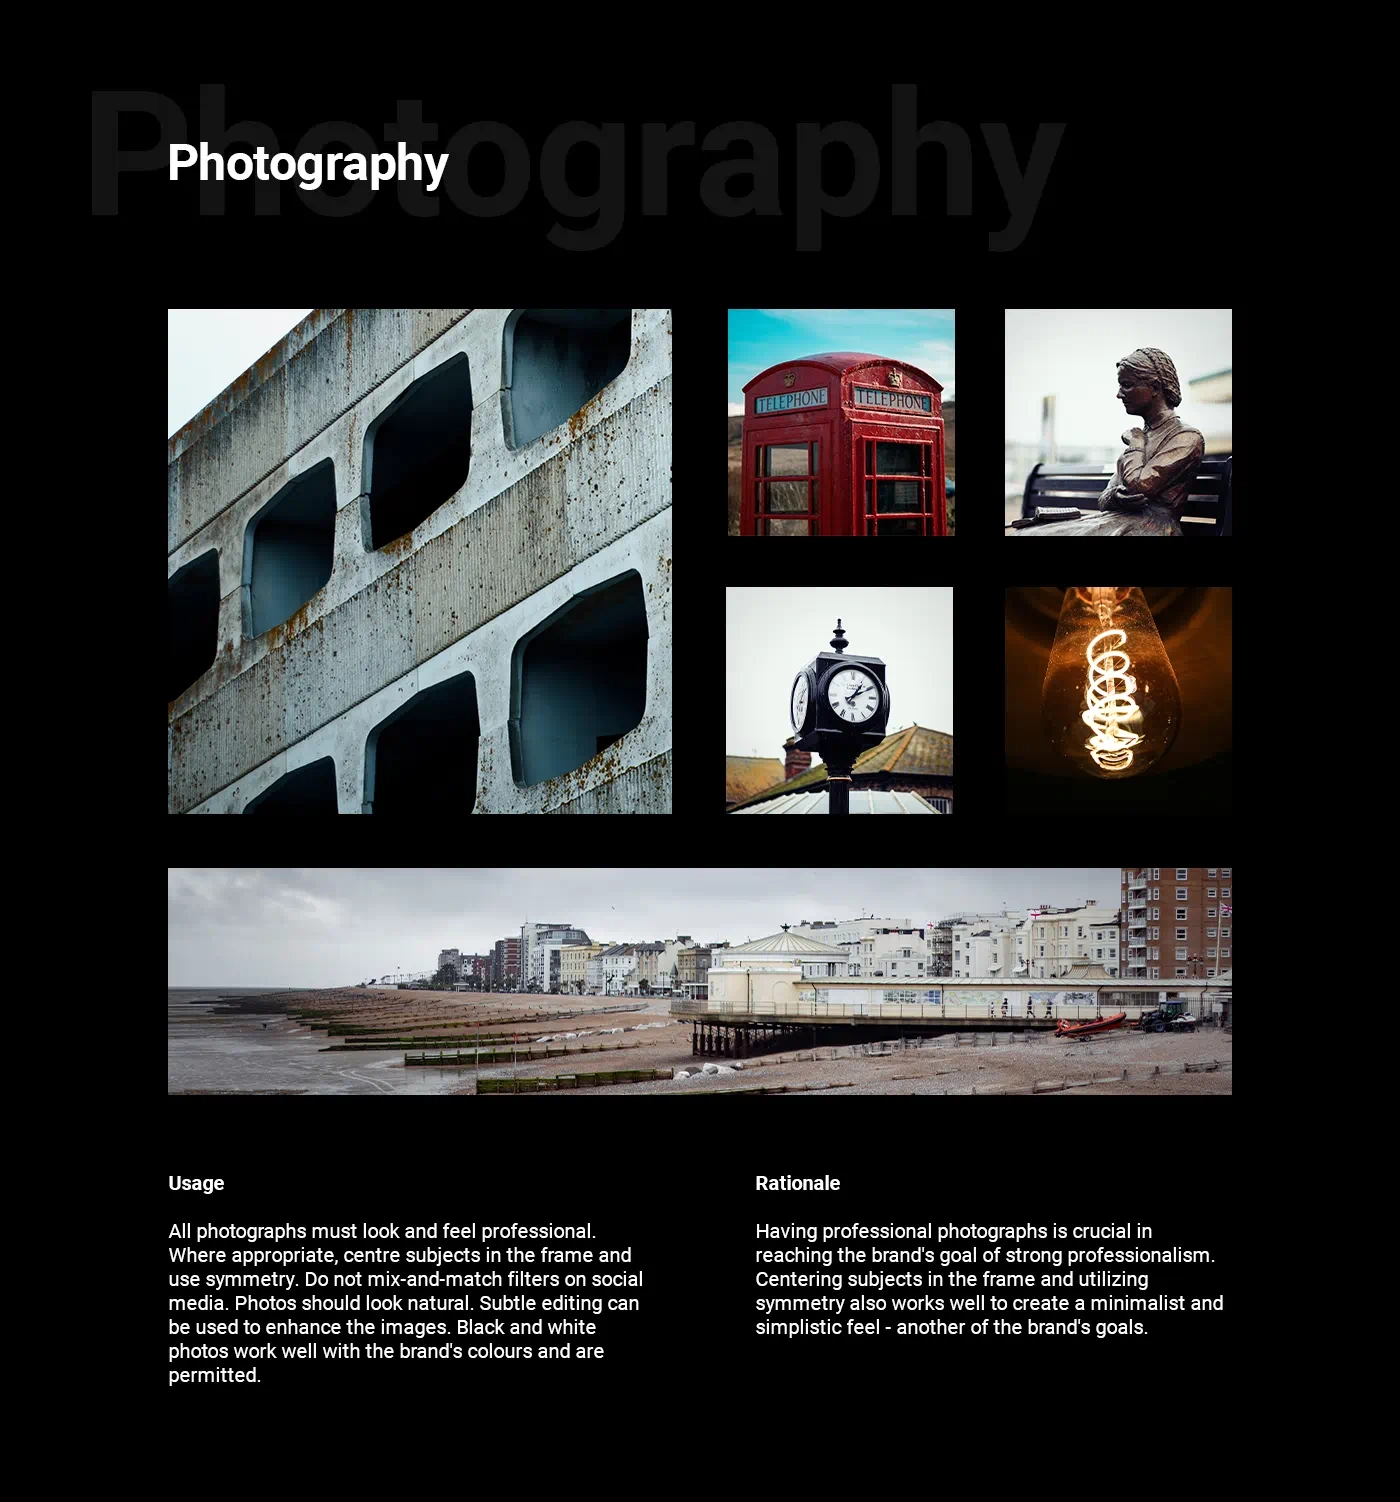 The photography page displays a variety of professional images as an example of the style and quality to be aimed for